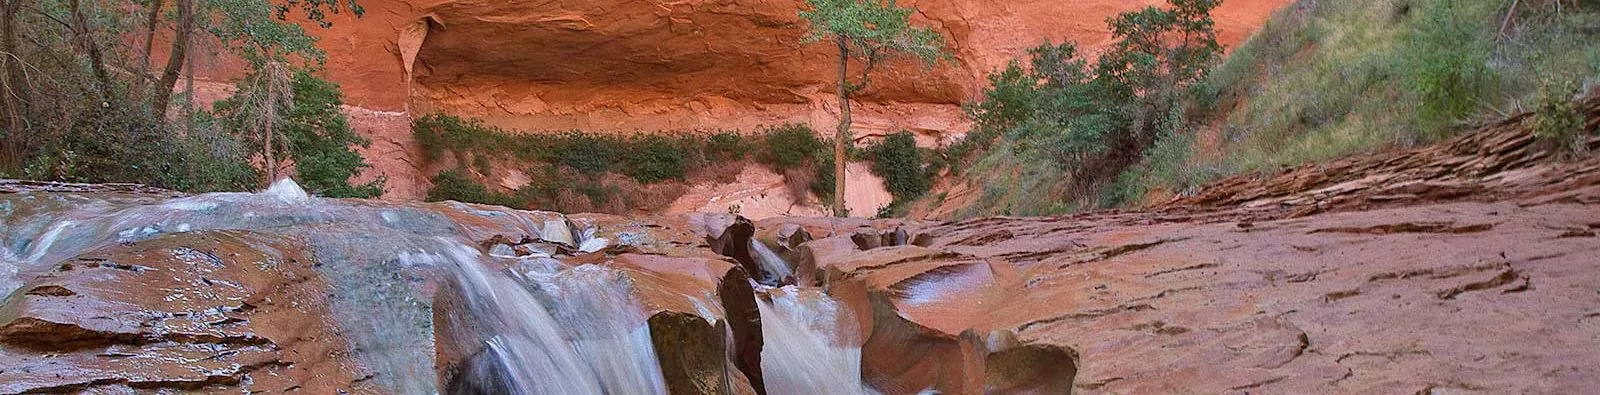 Water flowing the Escalante River in Grand Staircase Escalante National Monument